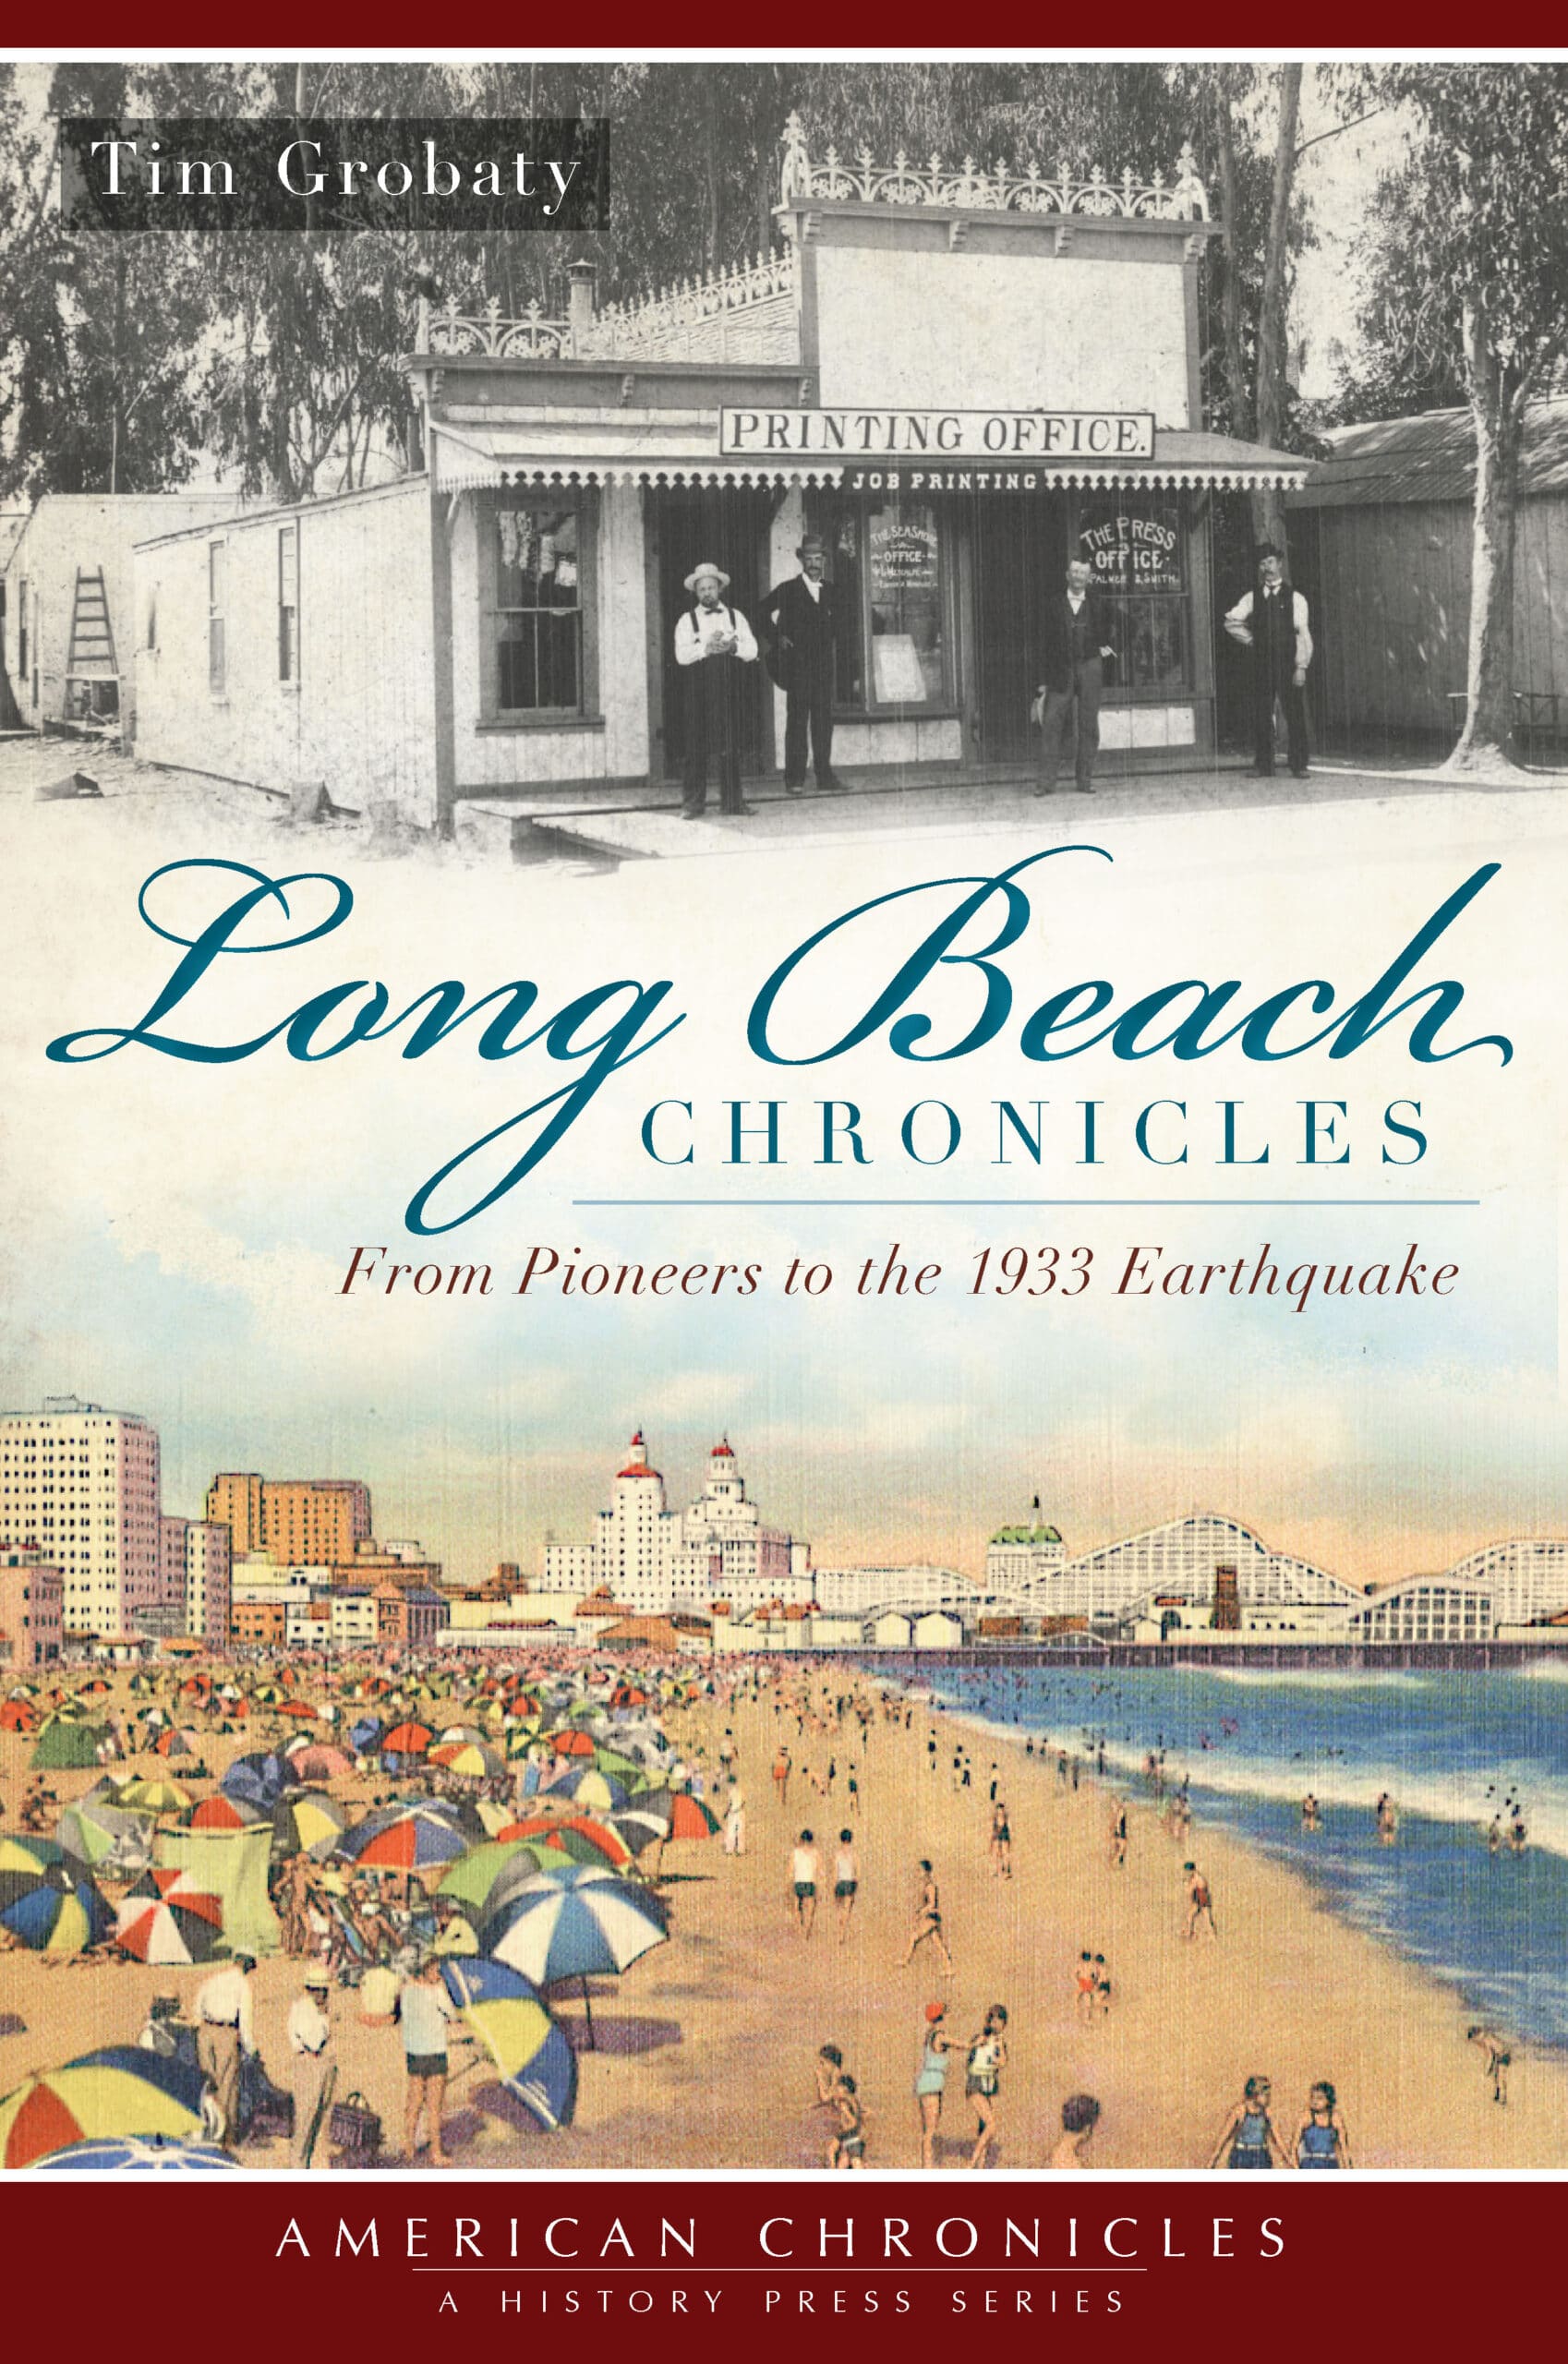 Long beach chronicles from pioneers to the 1933 earthquake